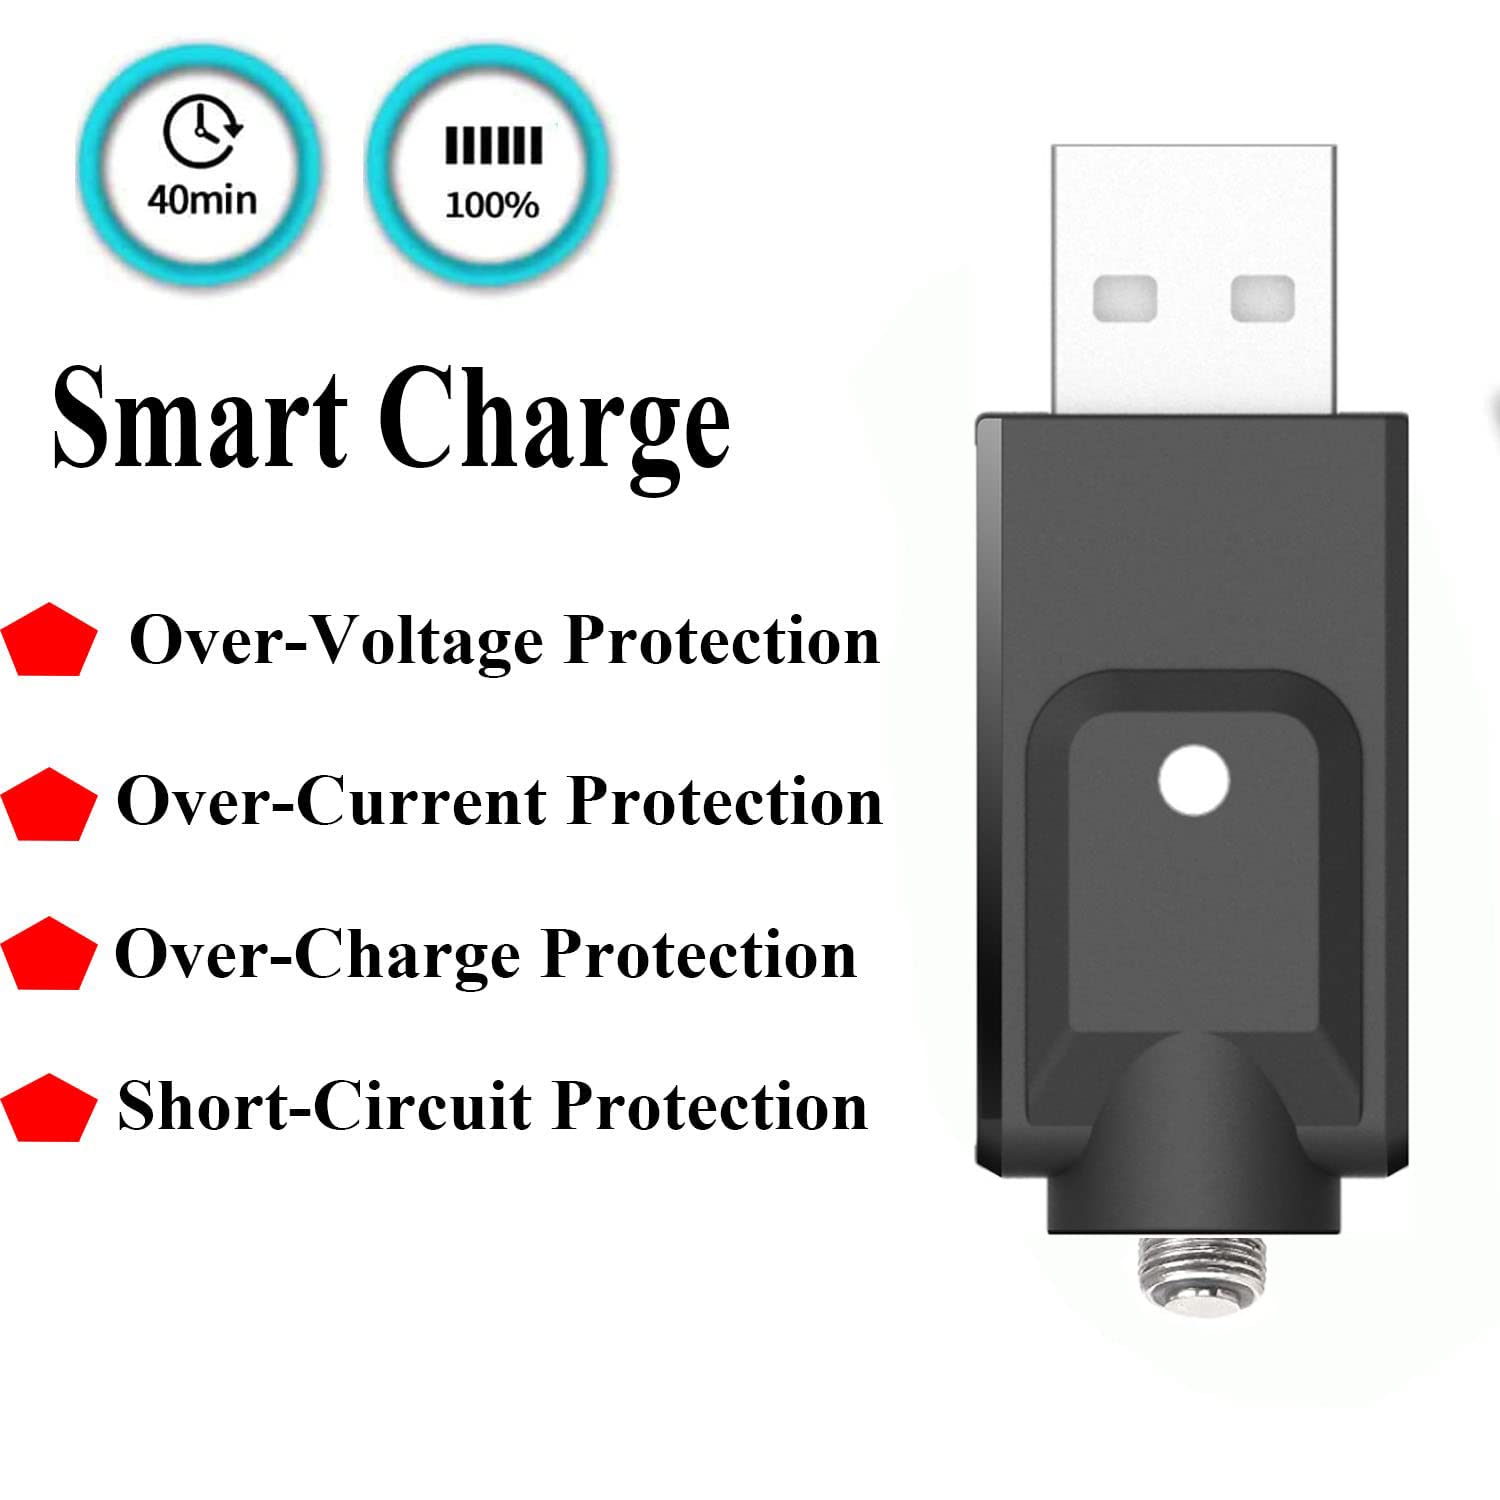 ESUYUTOS Smart USB Thread Charger Cable, USB Thread Cable, USB Charger Thread Portable USB with Intelligent Overcharge Protection LED Indicator - 2 PCSUSB